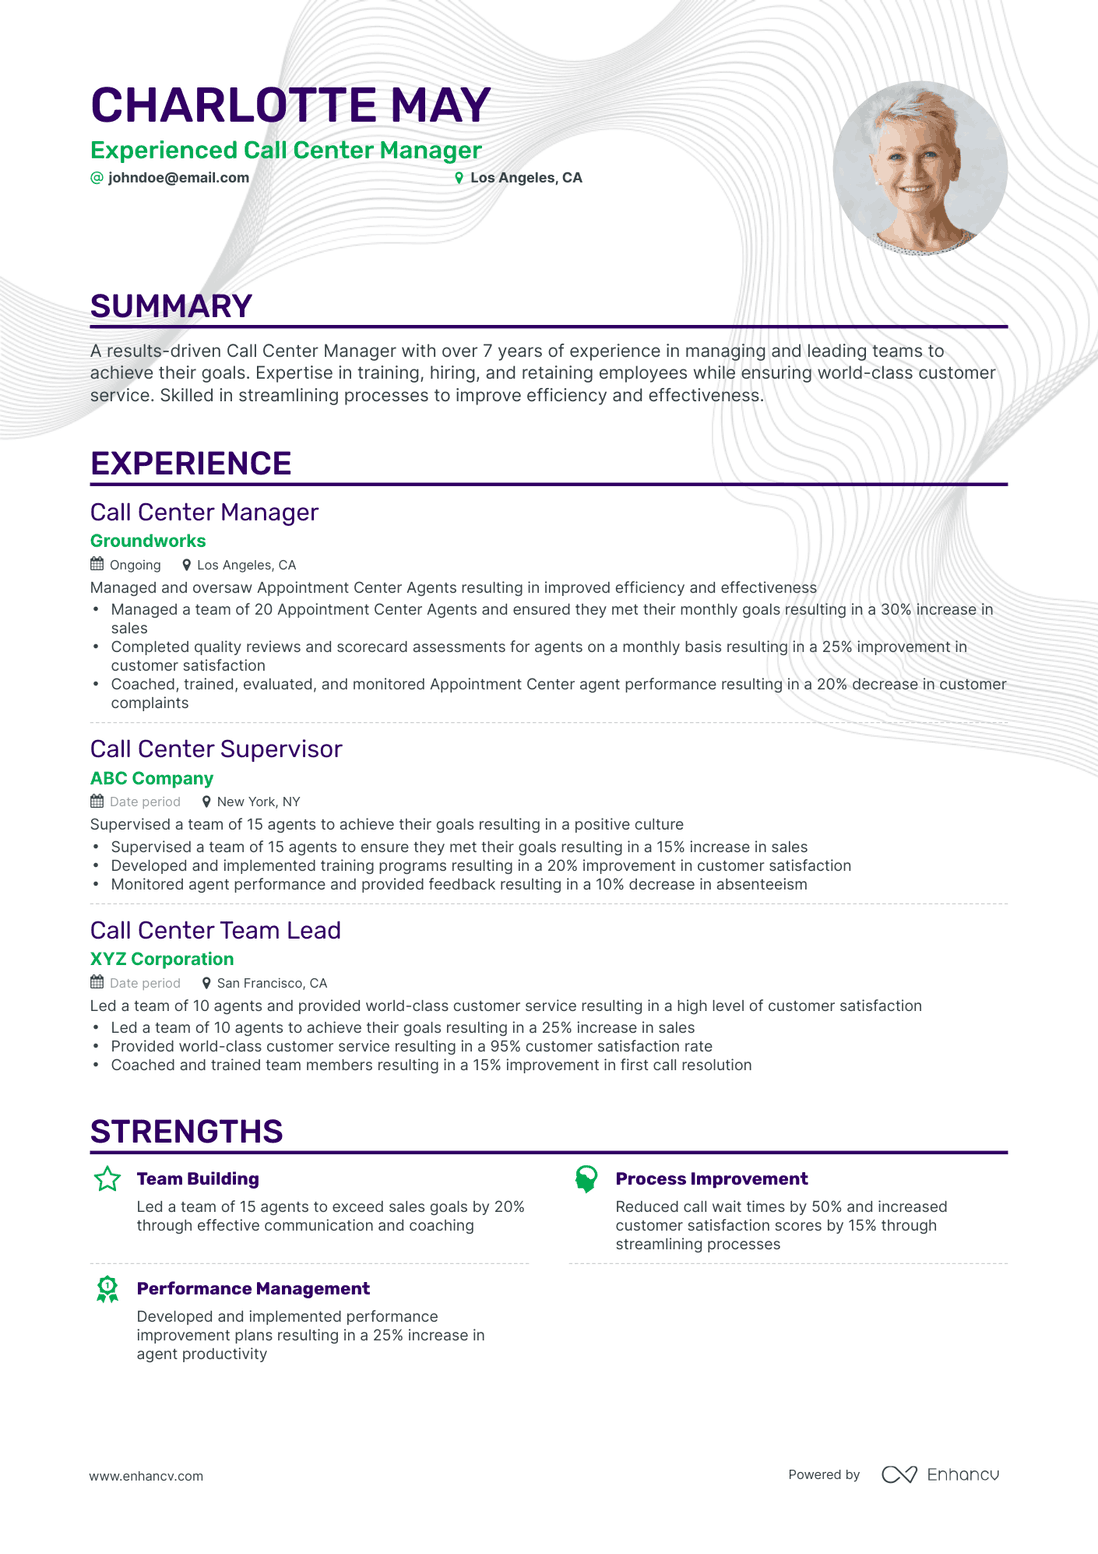 Classic Call Center Manager Resume Template